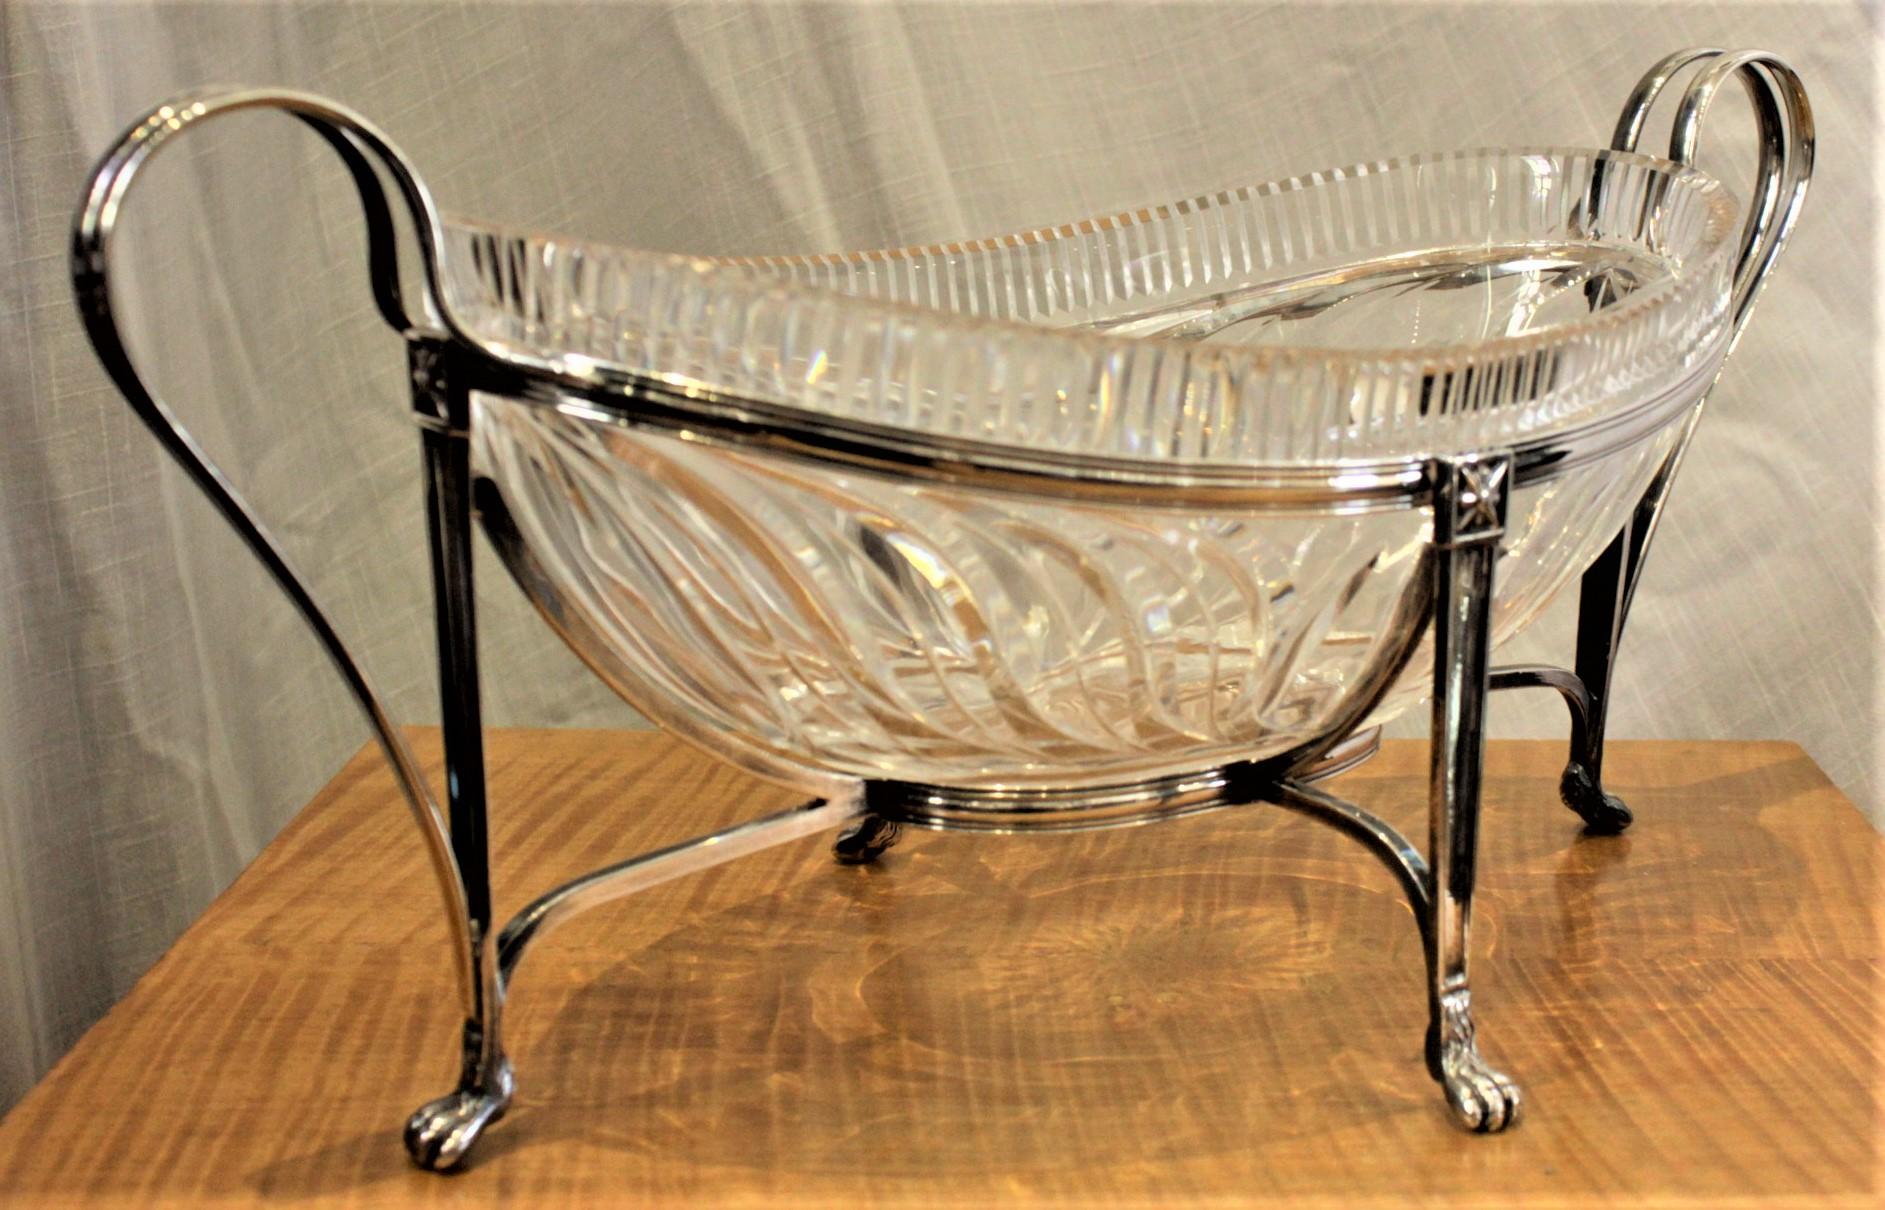 19th Century Antique Anglo-Irish Cut Crystal Centerpiece Bowl with Silver Plated Stand For Sale